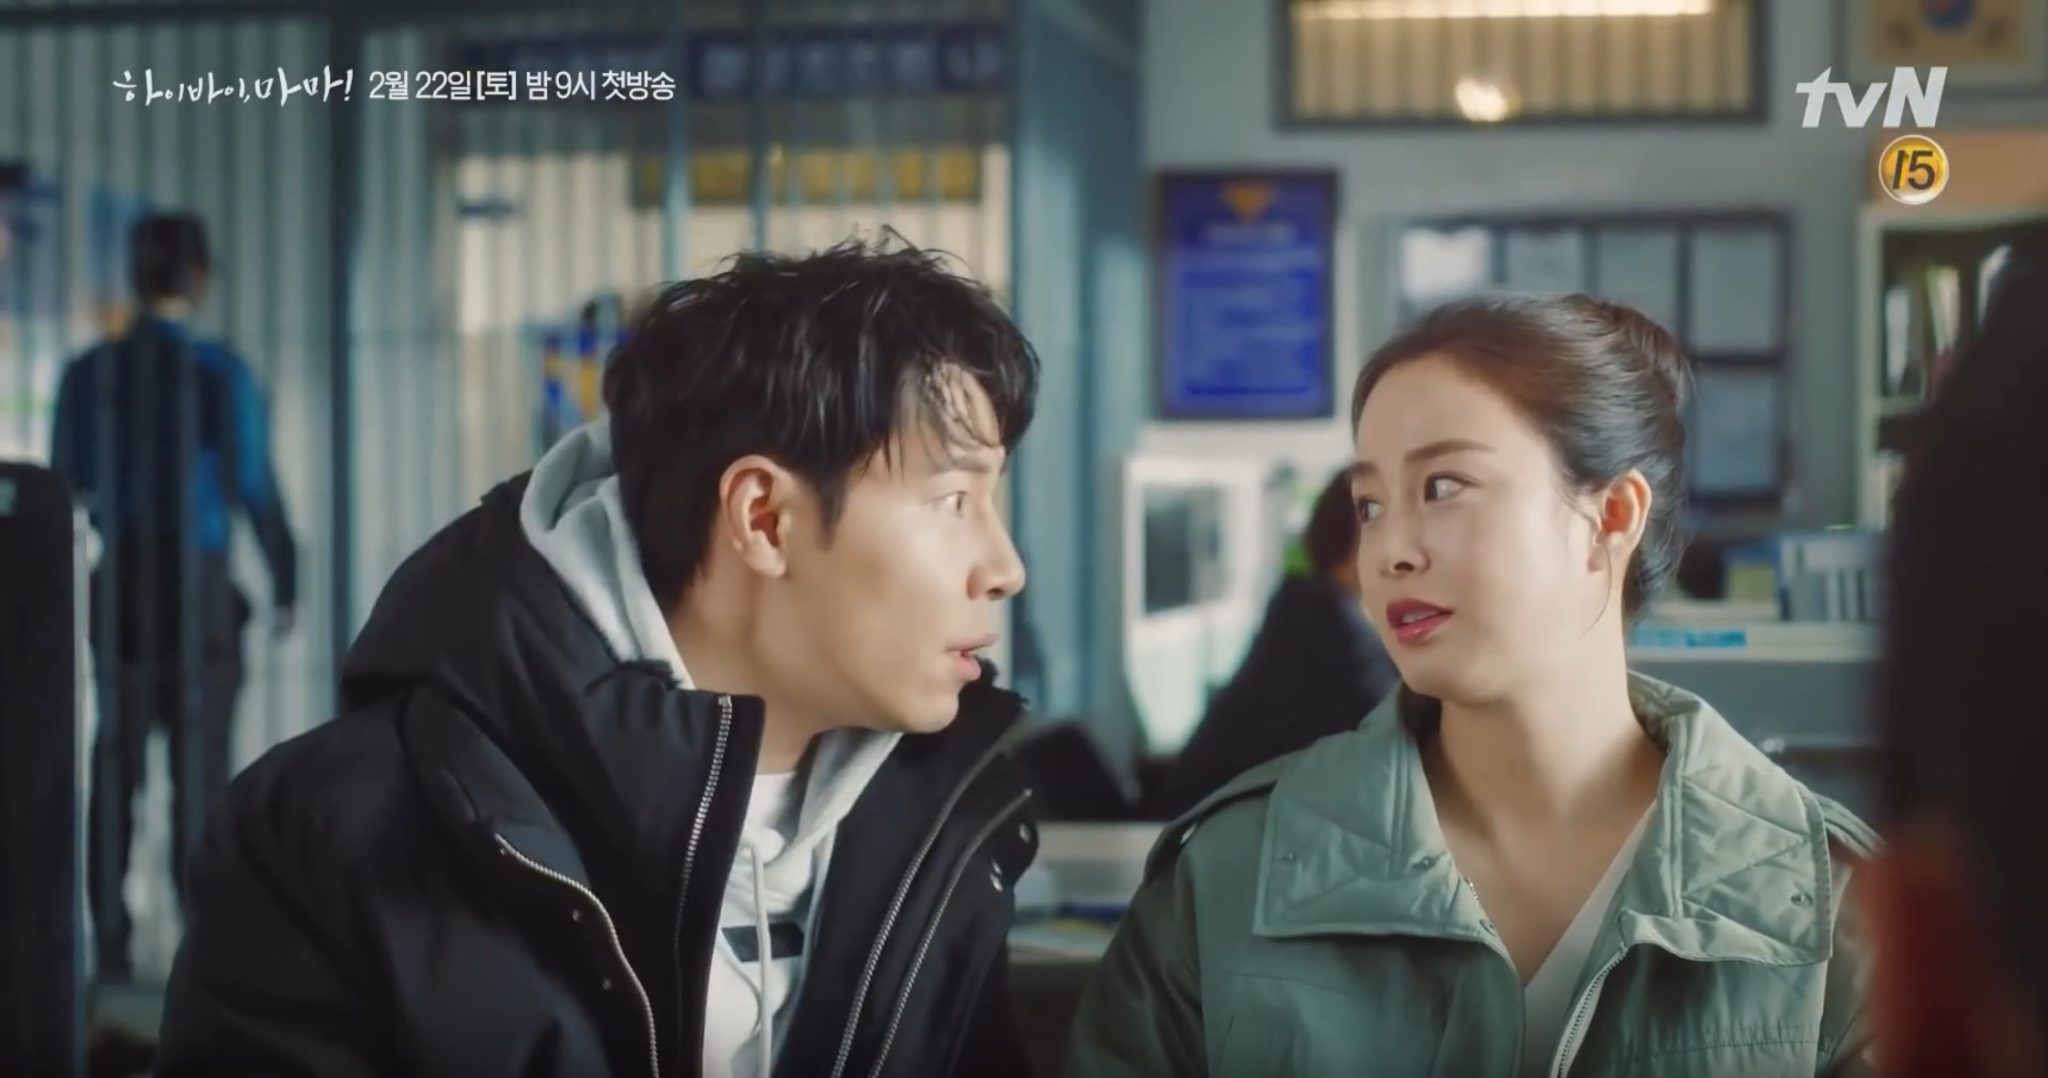 Kim Tae Hee Reunites With Lee Kyu Hyung In New Teaser For TvN's Hi